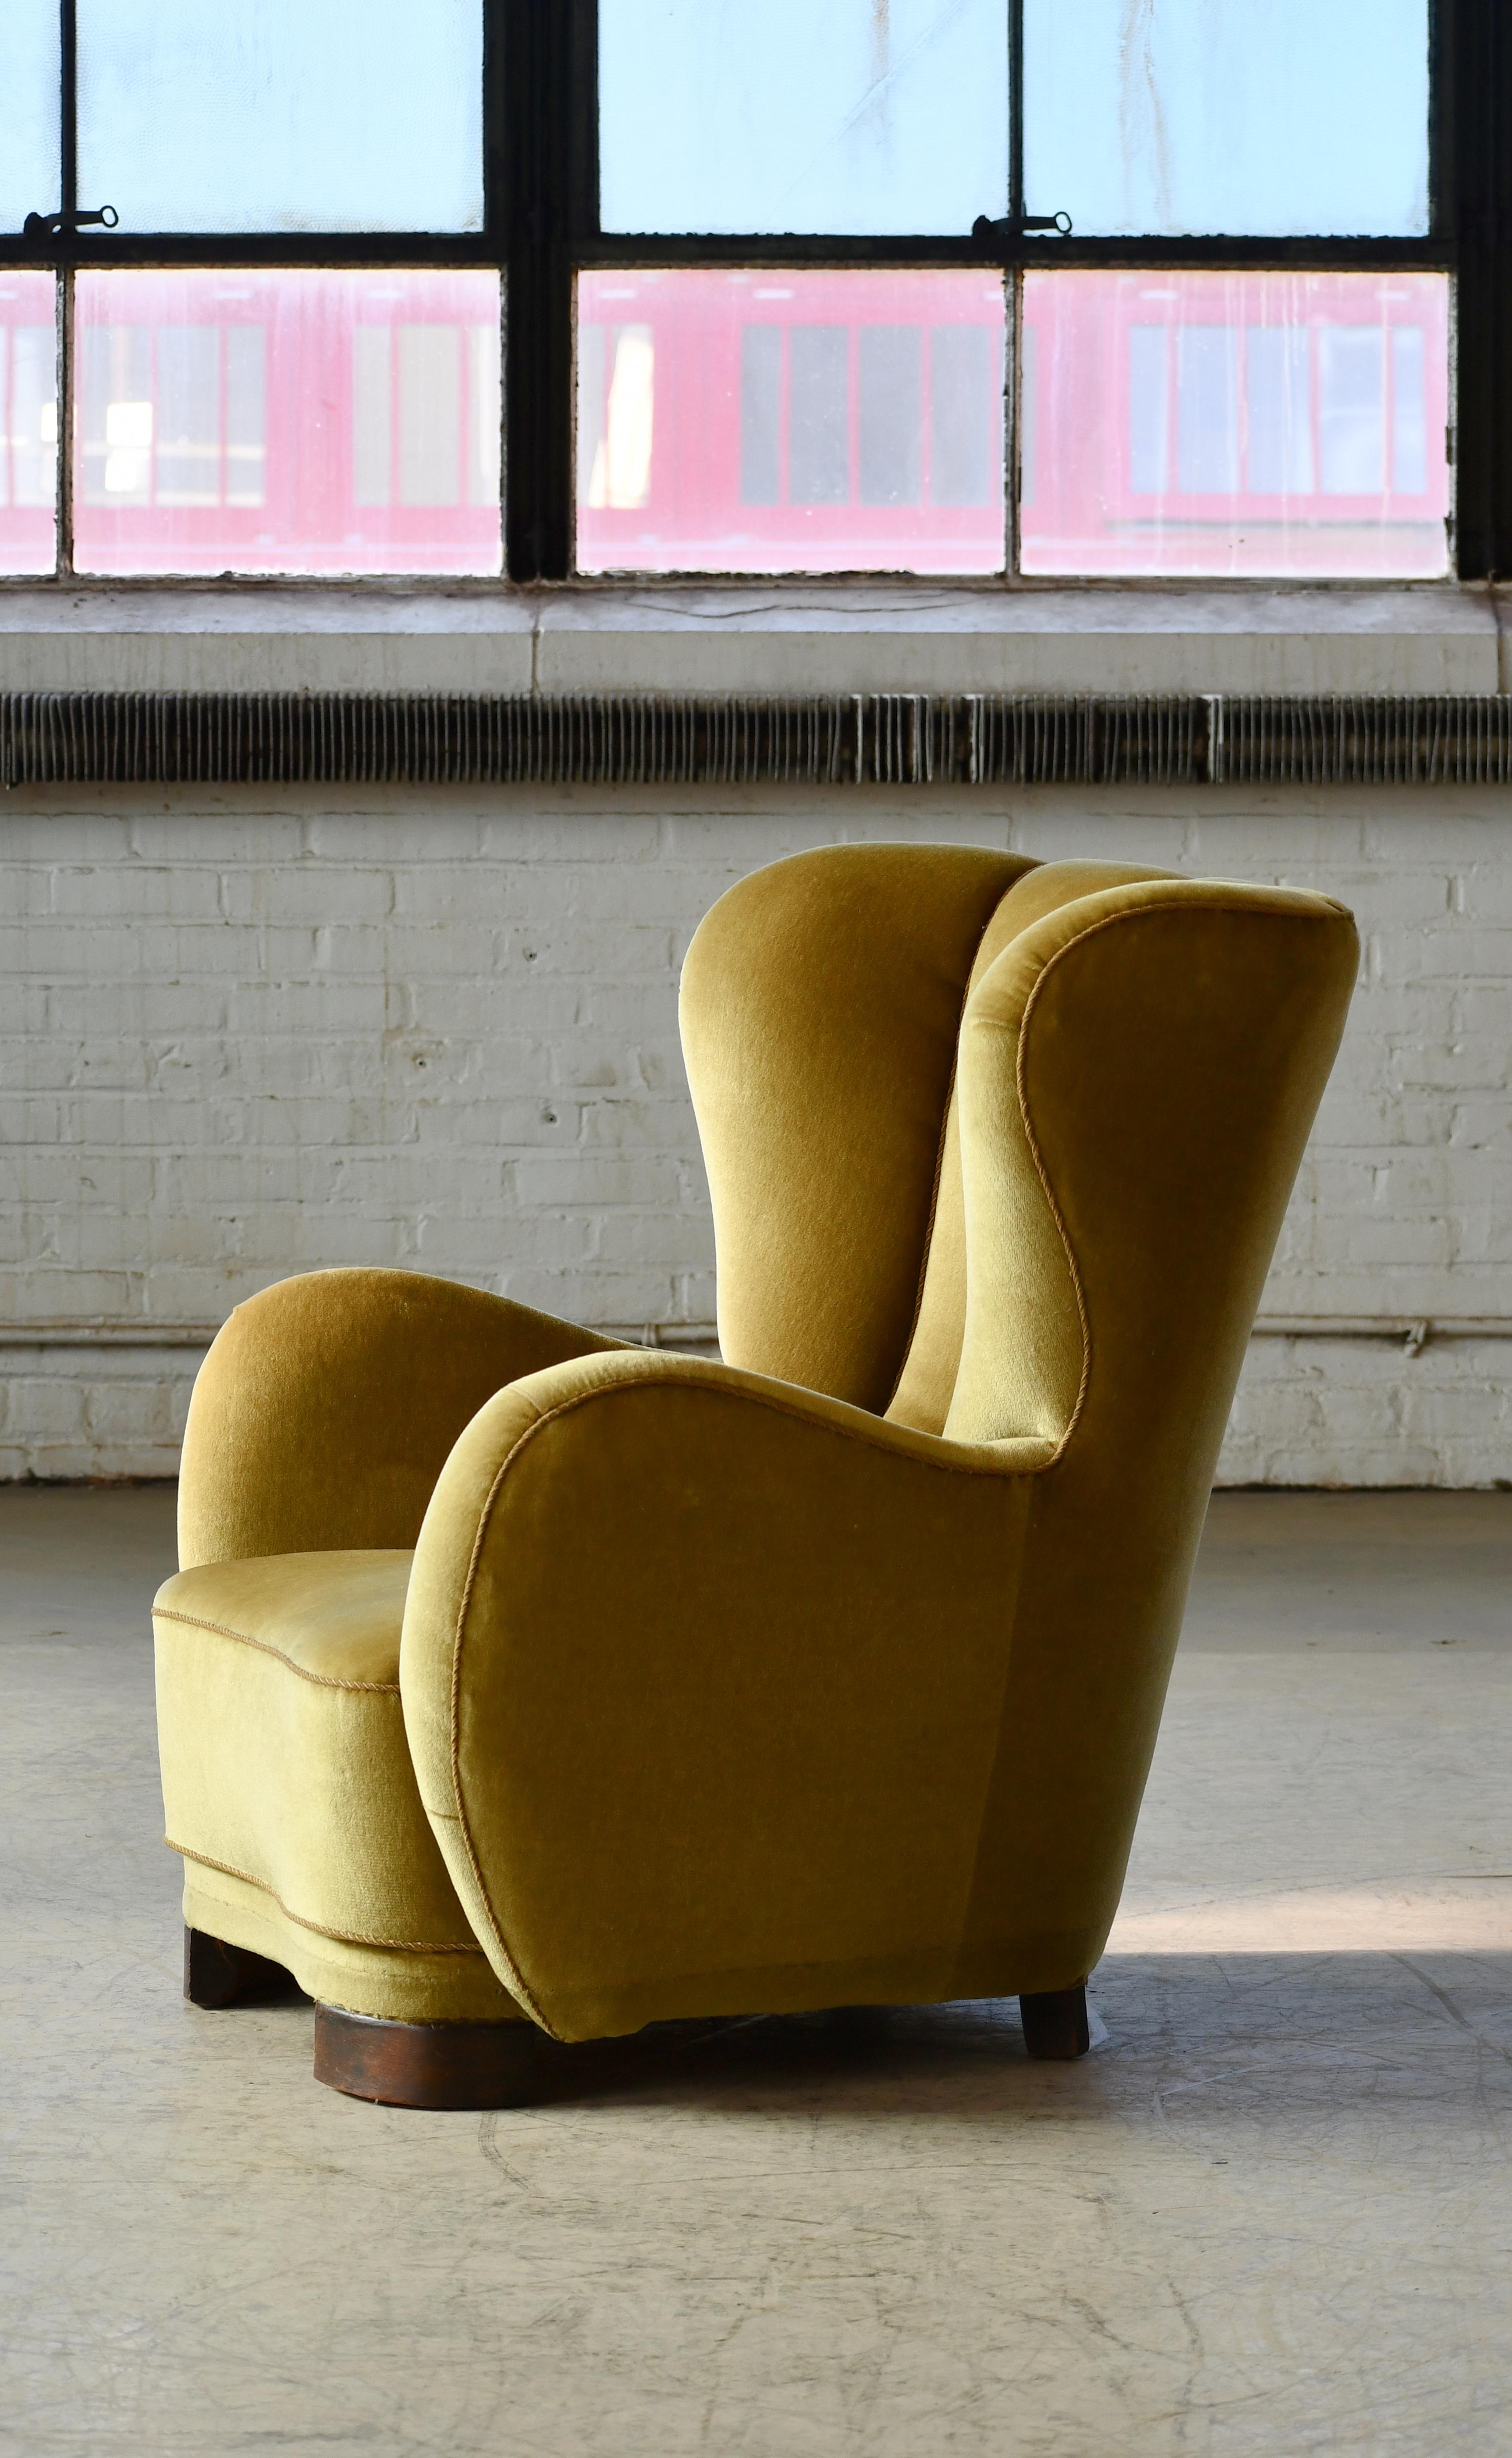 Mogens Lassen Style Danish 1940s Channel Back Lounge Chair in Mohair Fabric For Sale 3